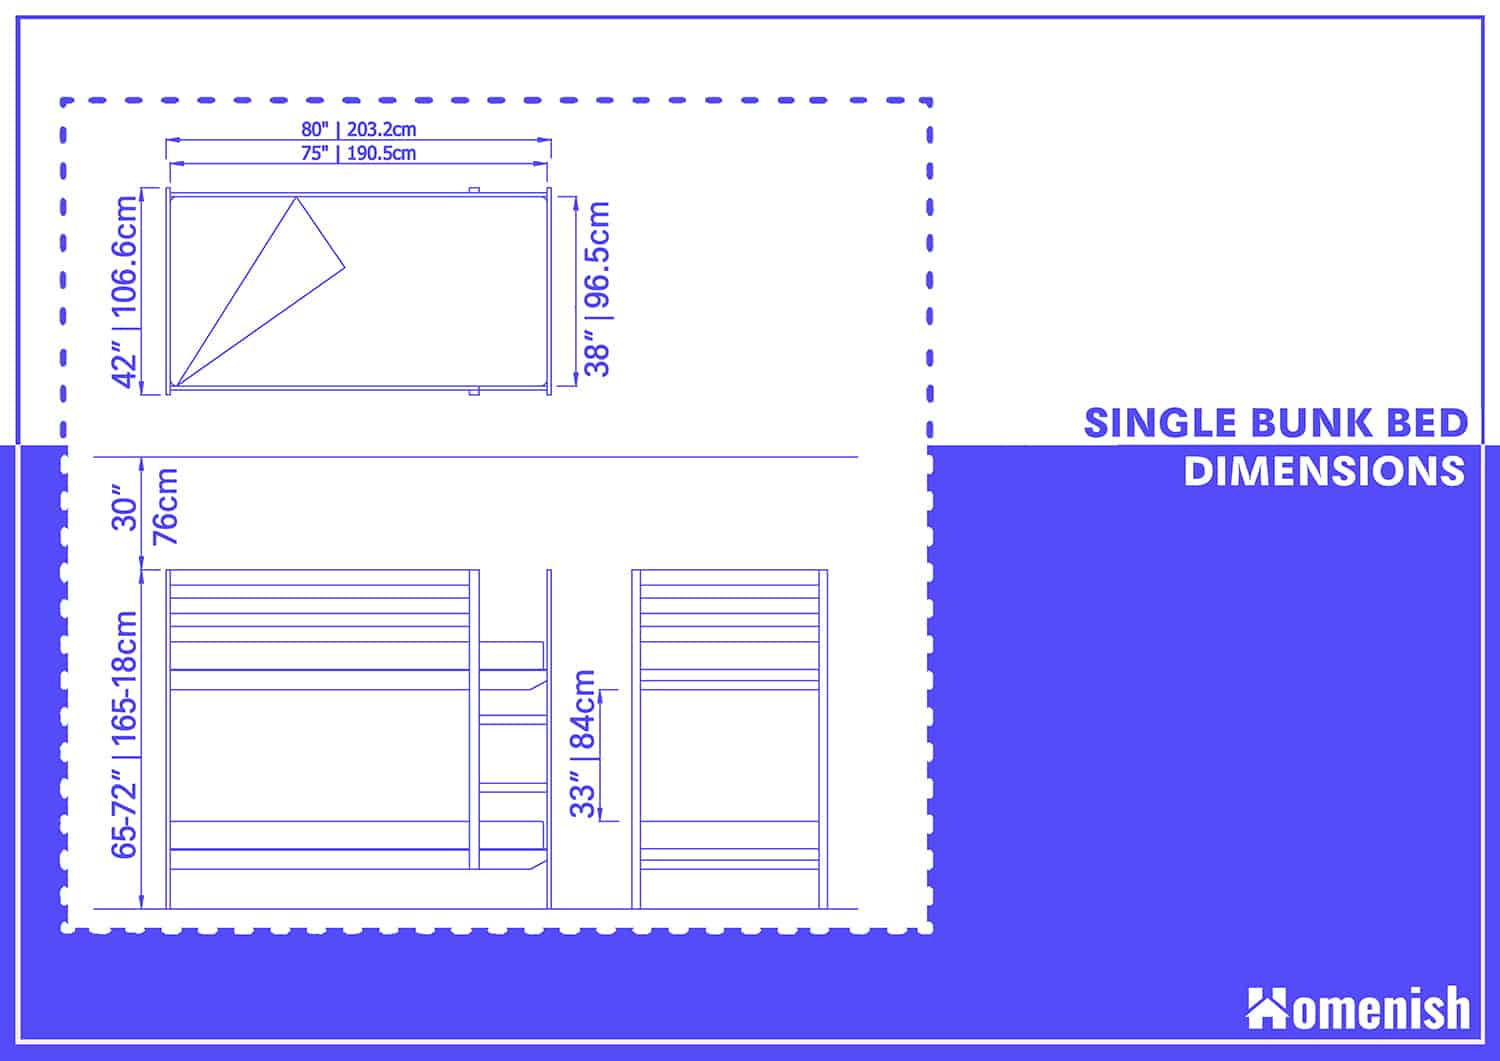 Single Bunk Bed Dimensions